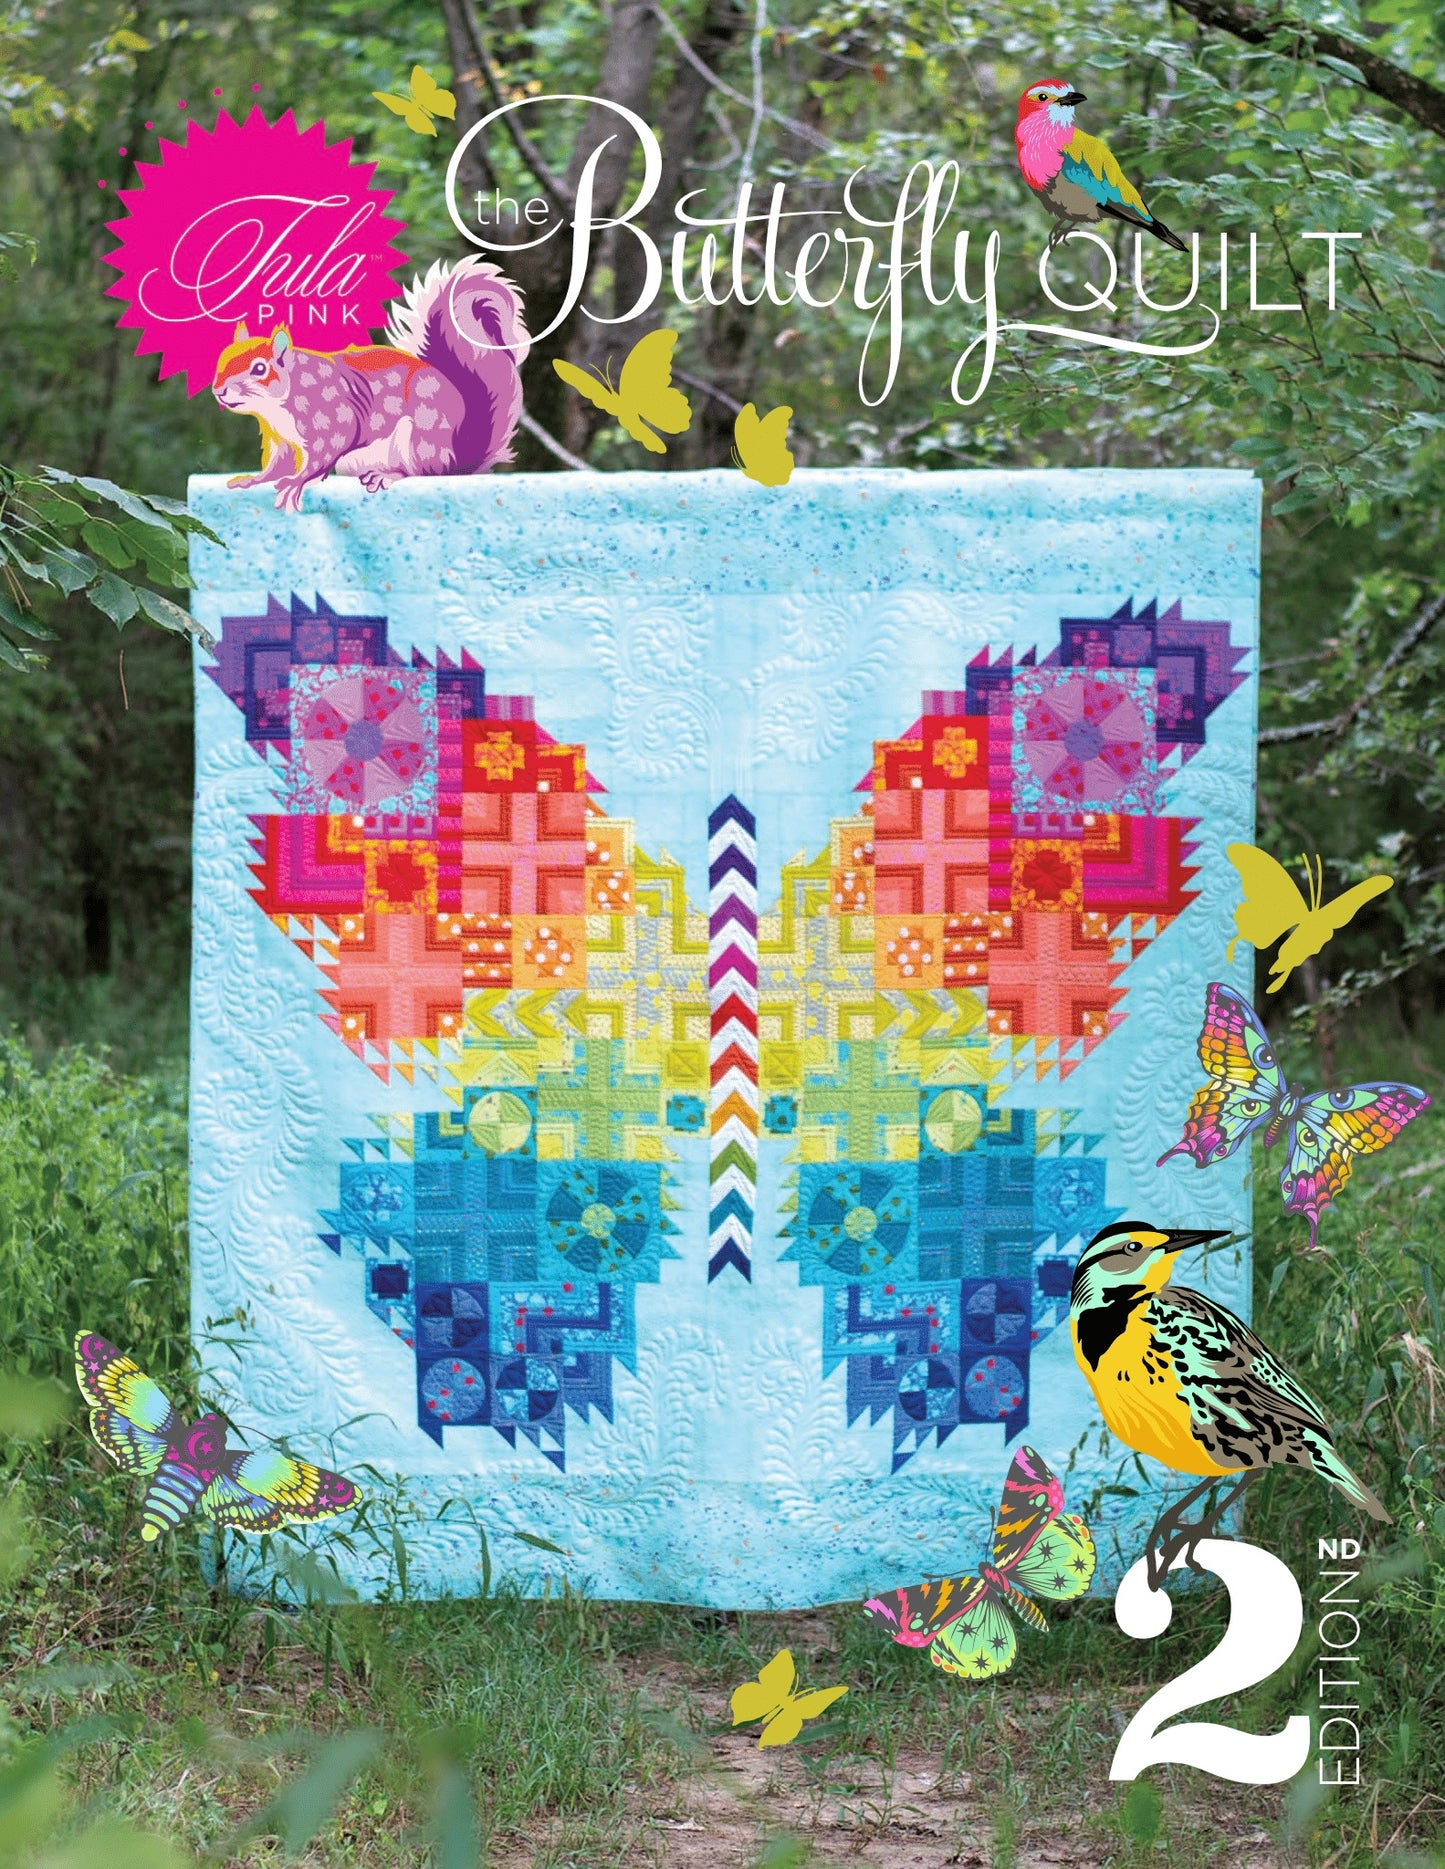 Tula Pink's Butterfly Quilt 2:  Fabric Pack